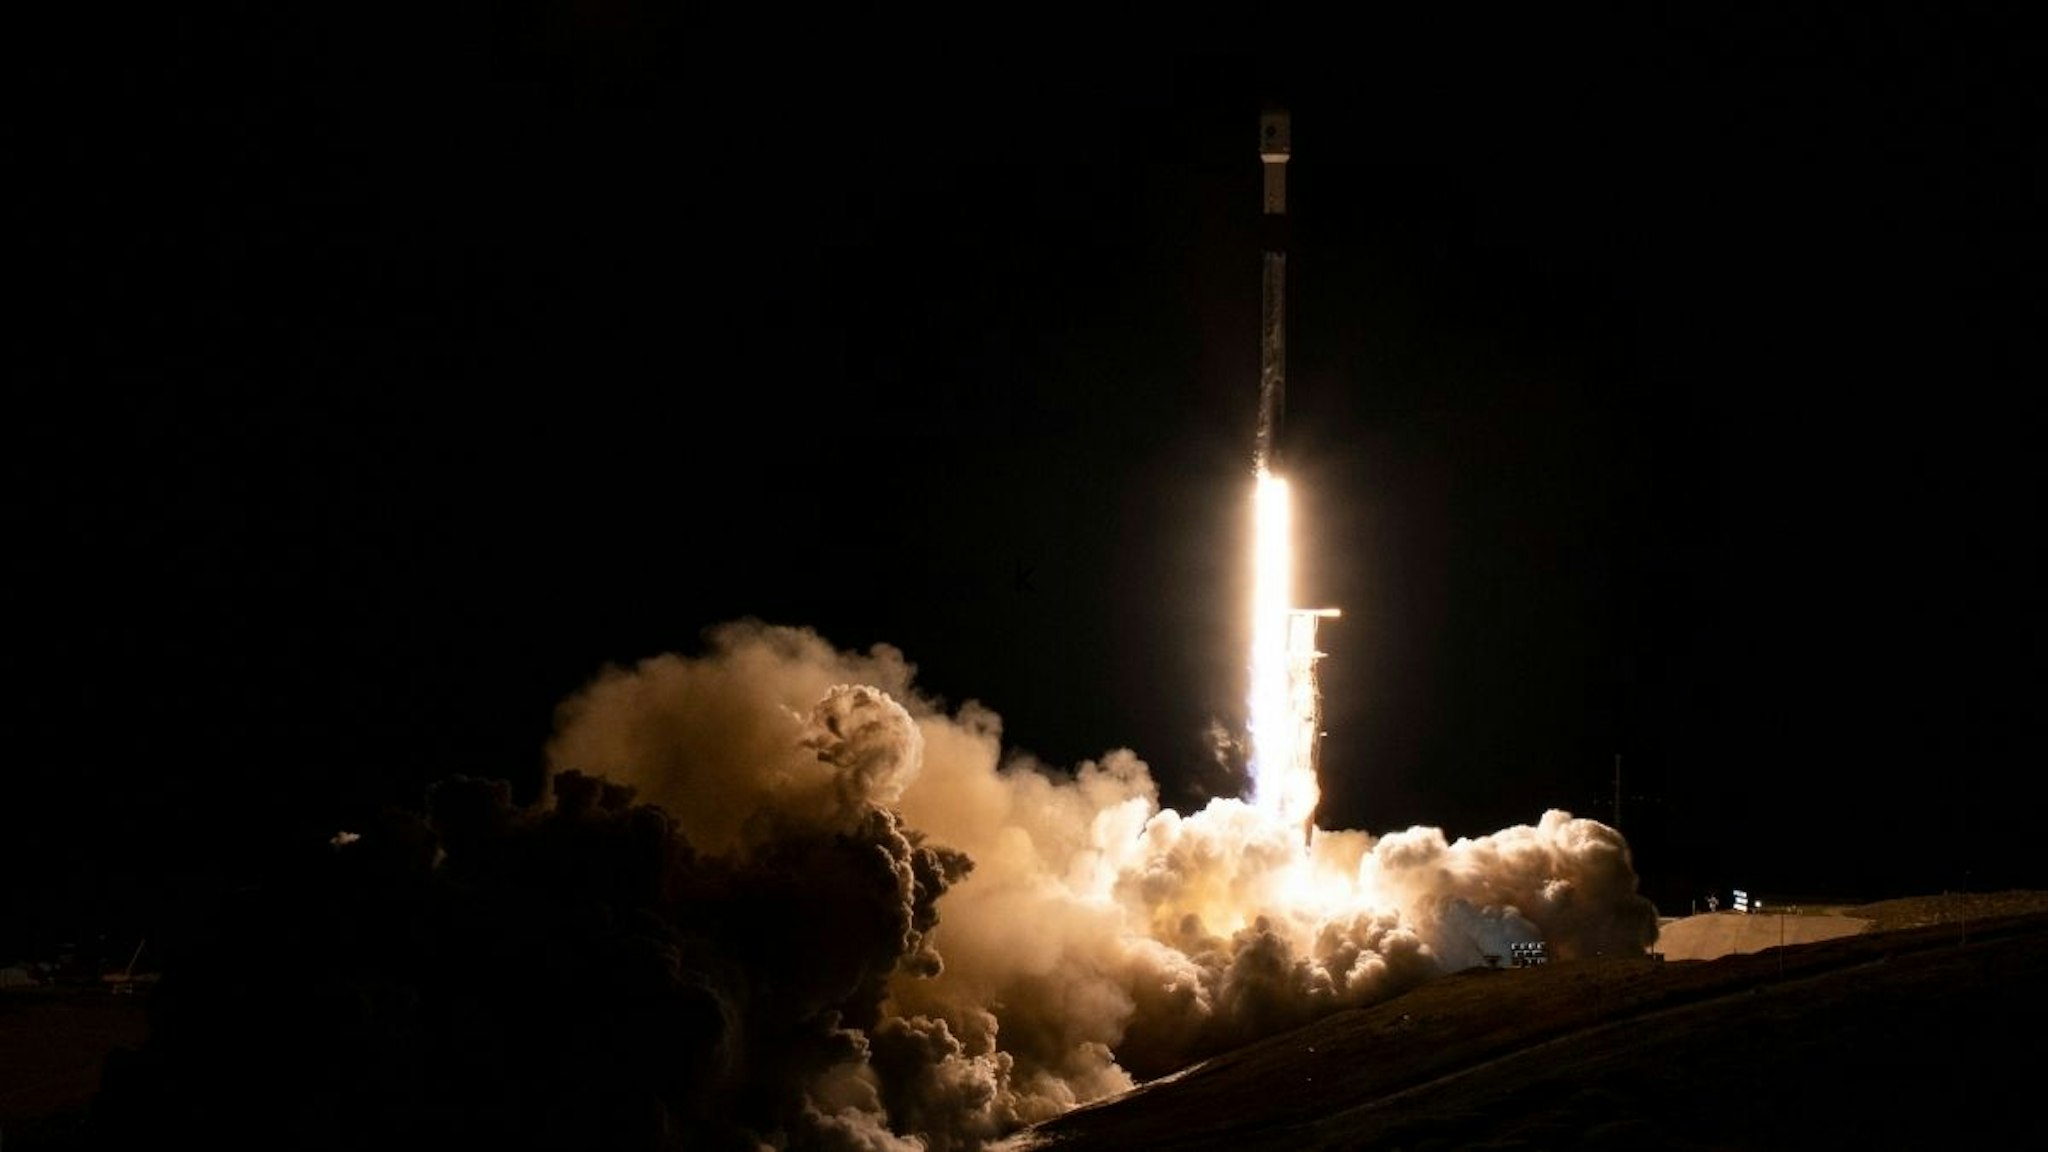 A SpaceX Falcon 9 rocket launches with the Surface Water and Ocean Topography (SWOT) spacecraft onboard, on December 16, 2022, from Space Launch Complex 4E at Vandenberg Space Force Base in Lompoc, California.